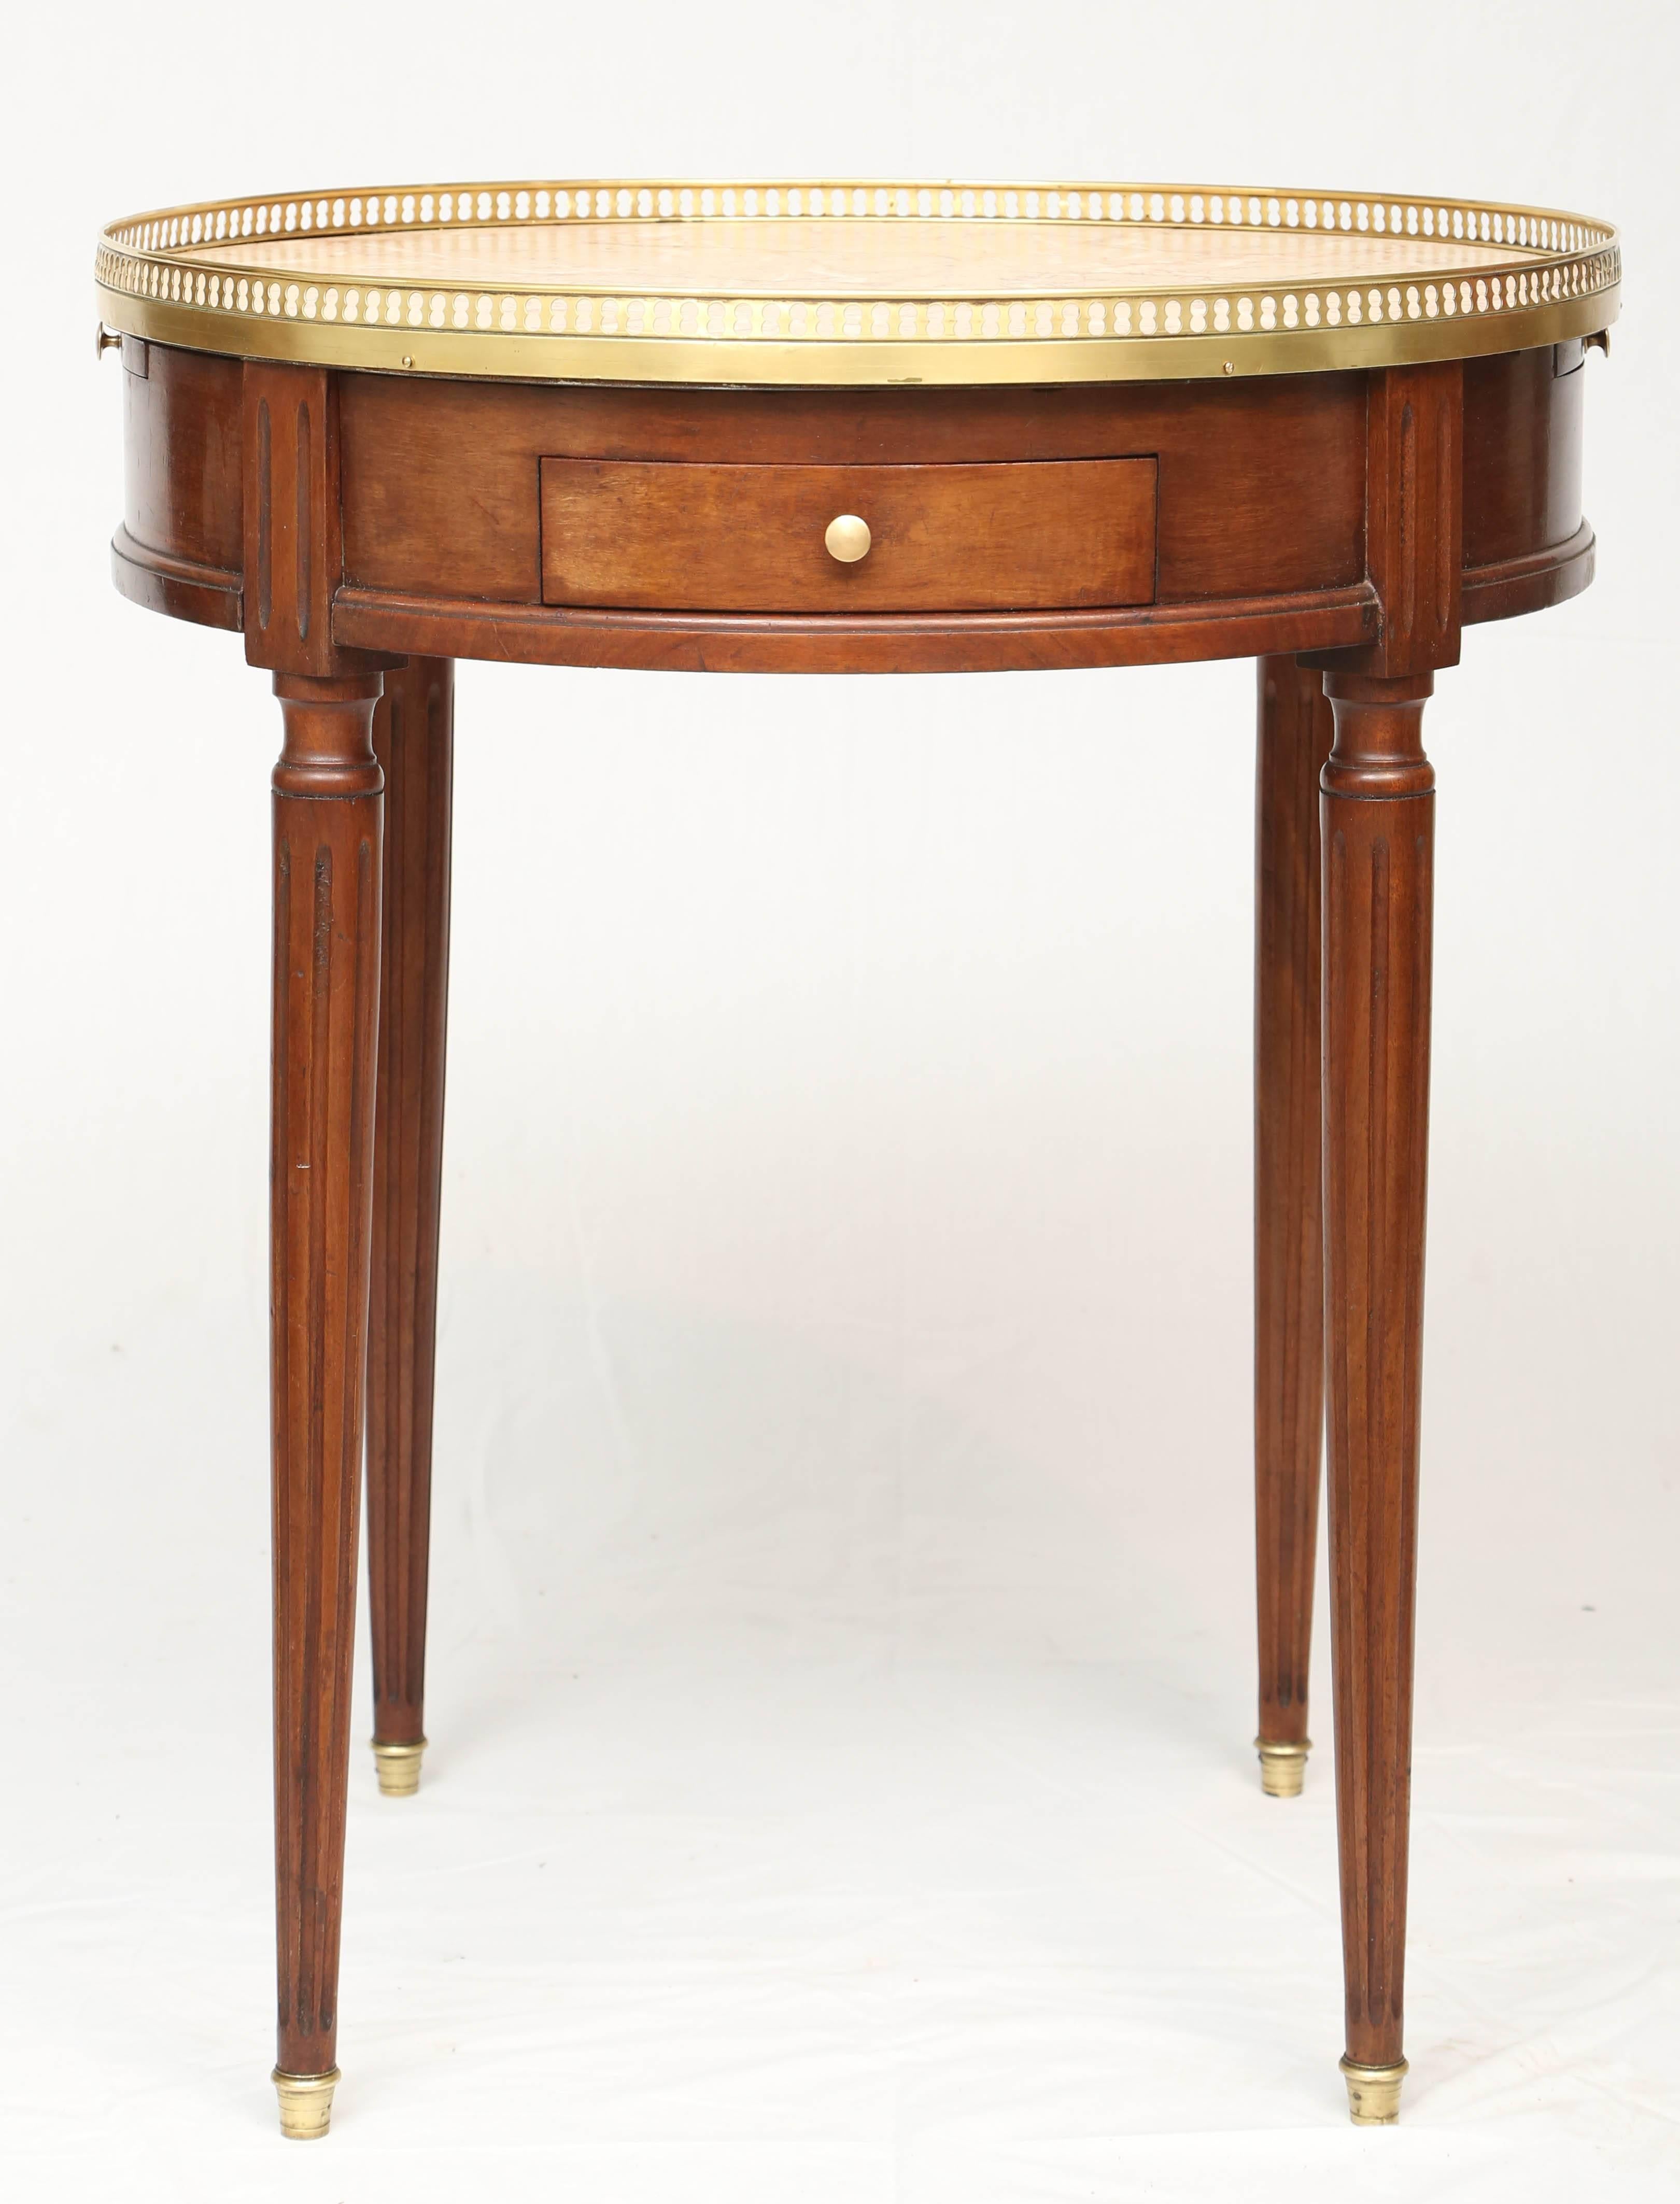 Bouillotte table, having a round top of marble, pierced brass gallery, over double frieze drawers and slides, raised on round, tapering, fluted legs and ending in brass cups.

Stock ID: D9347